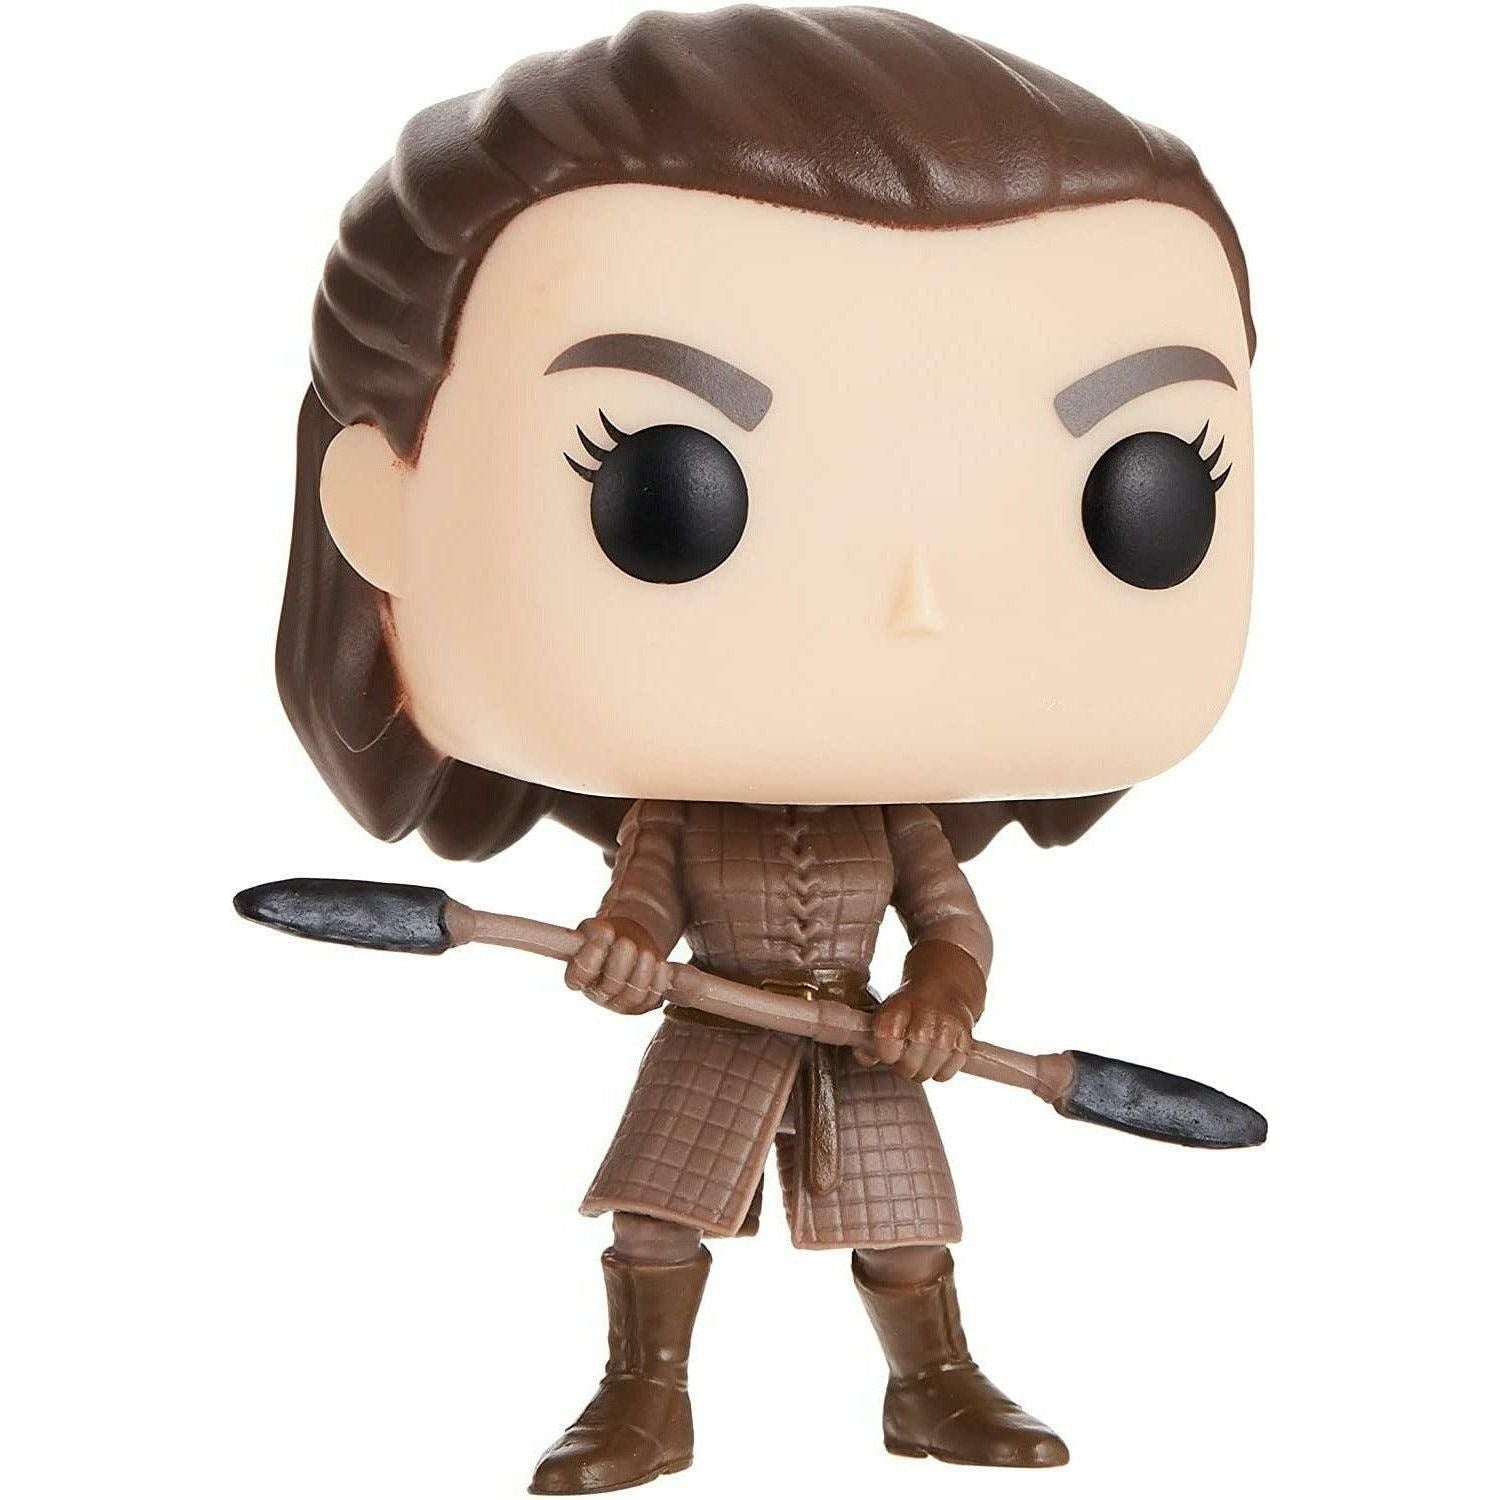 Funko POP TV Game of Thrones GOT - Arya with Two Headed Spear - BumbleToys - 18+, 5-7 Years, Boys, Fashion Dolls & Accessories, Figures, GOT, OXE, Pre-Order